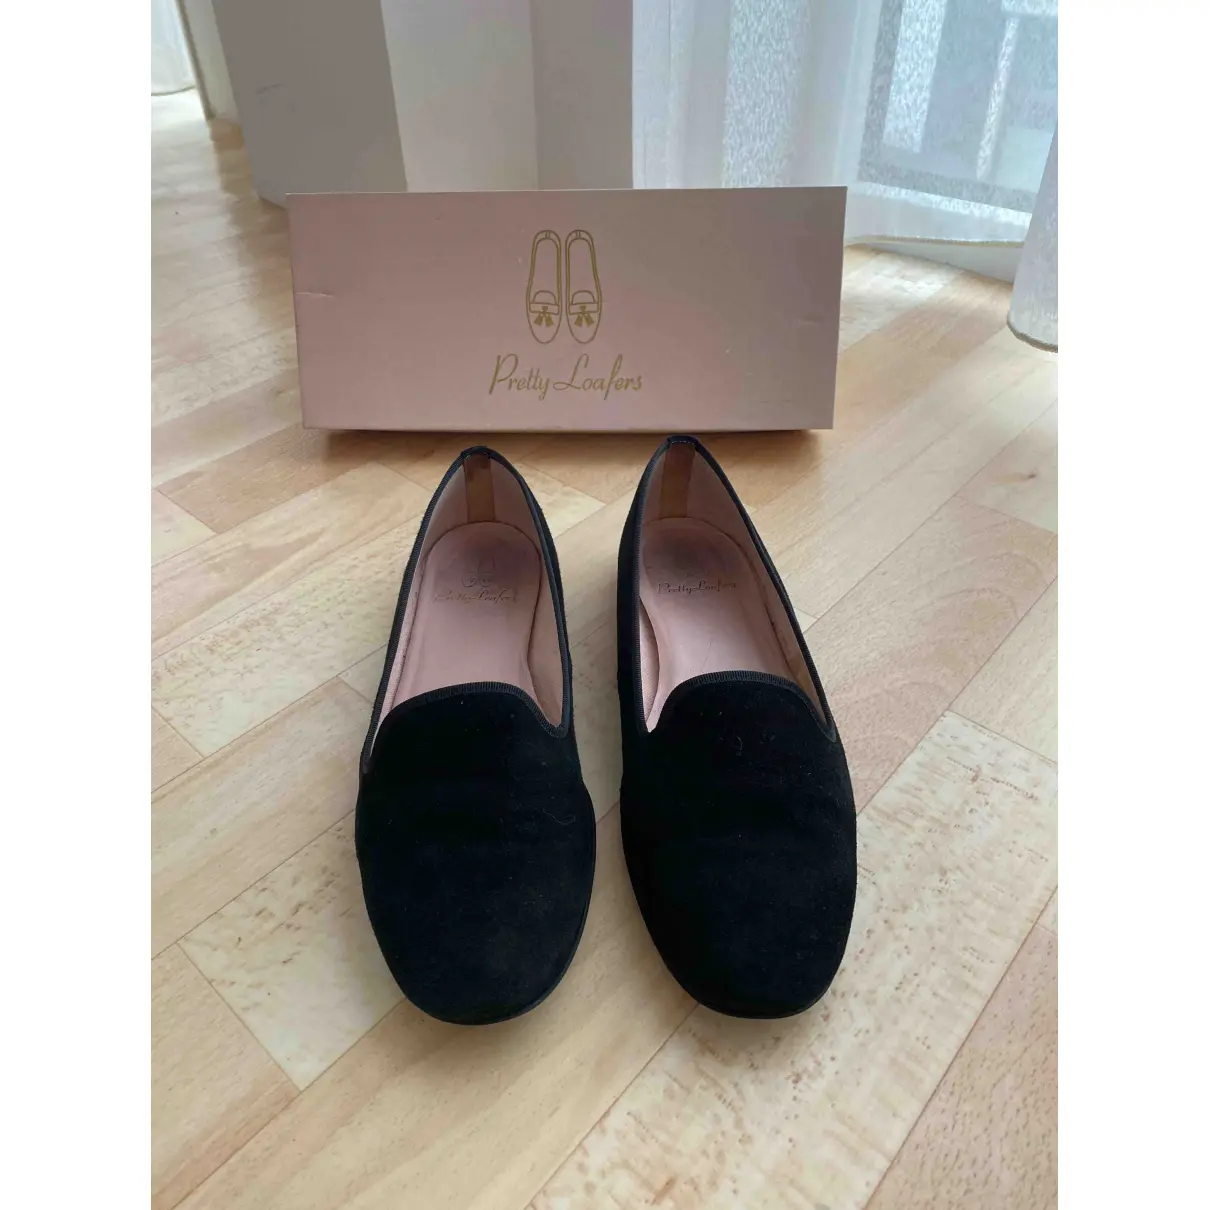 Buy Pretty Loafers Ballet flats online